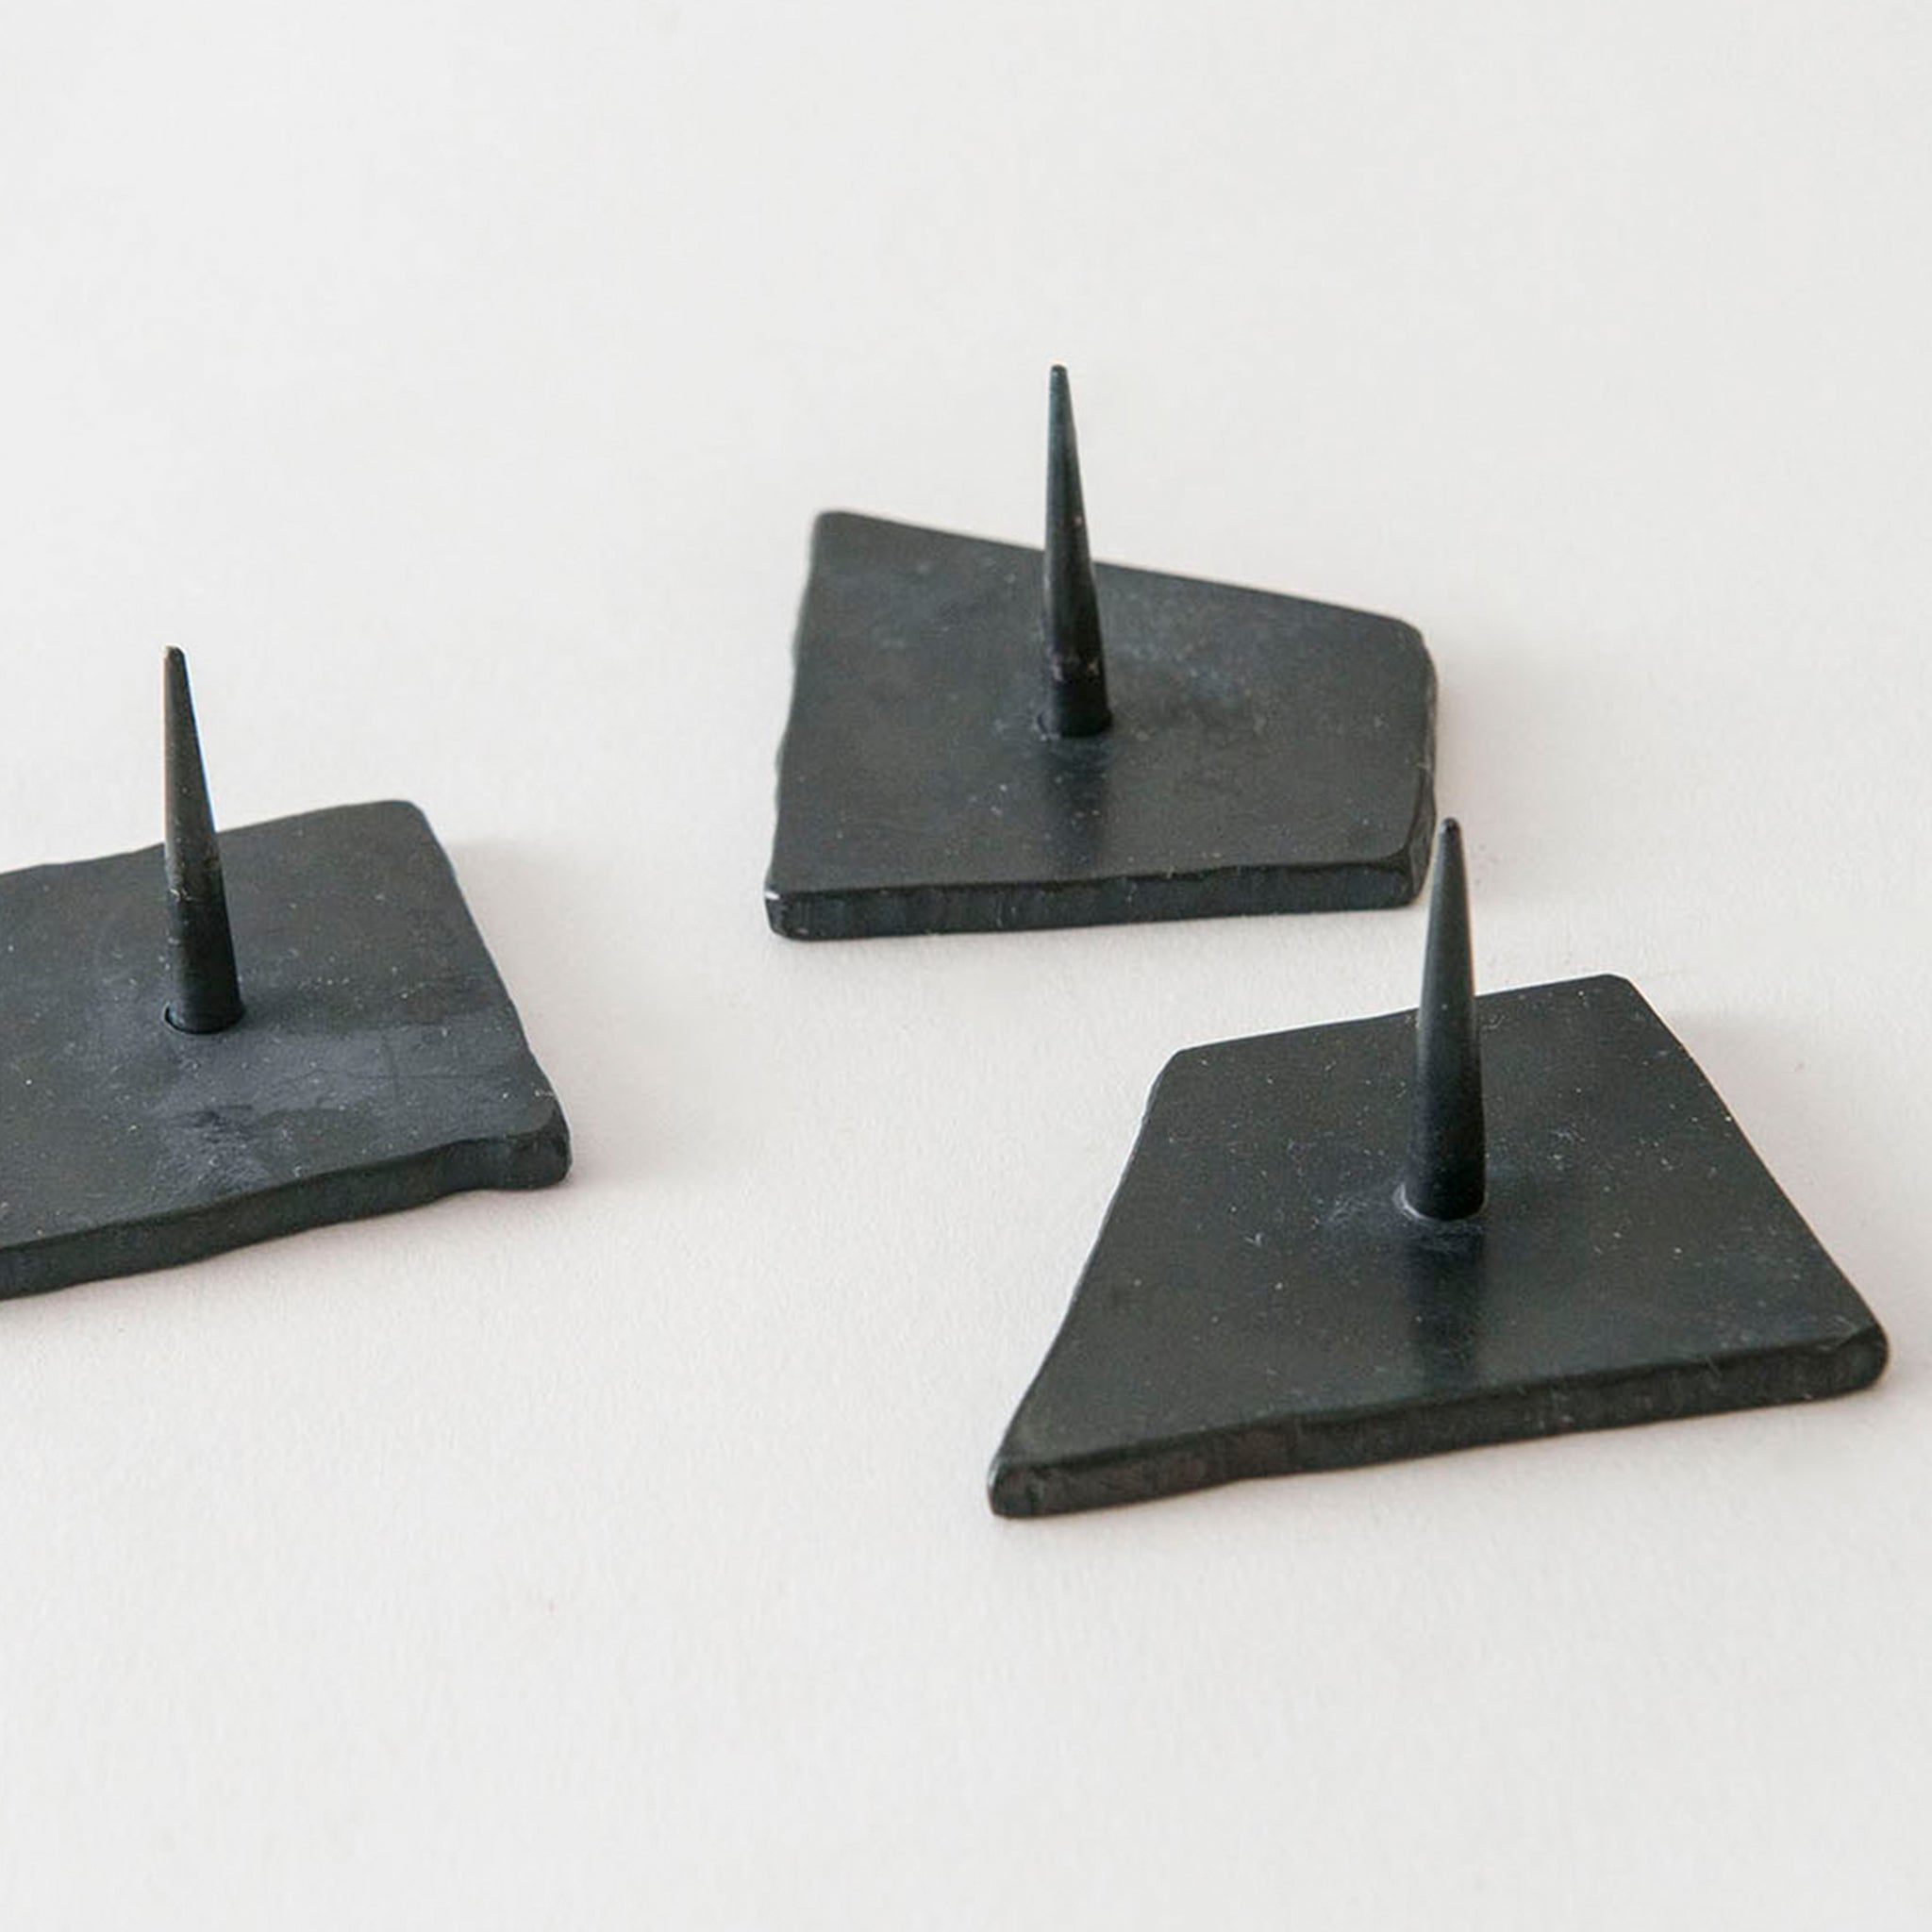 JAPANESE IRON CANDLE STAND BY DAIYO